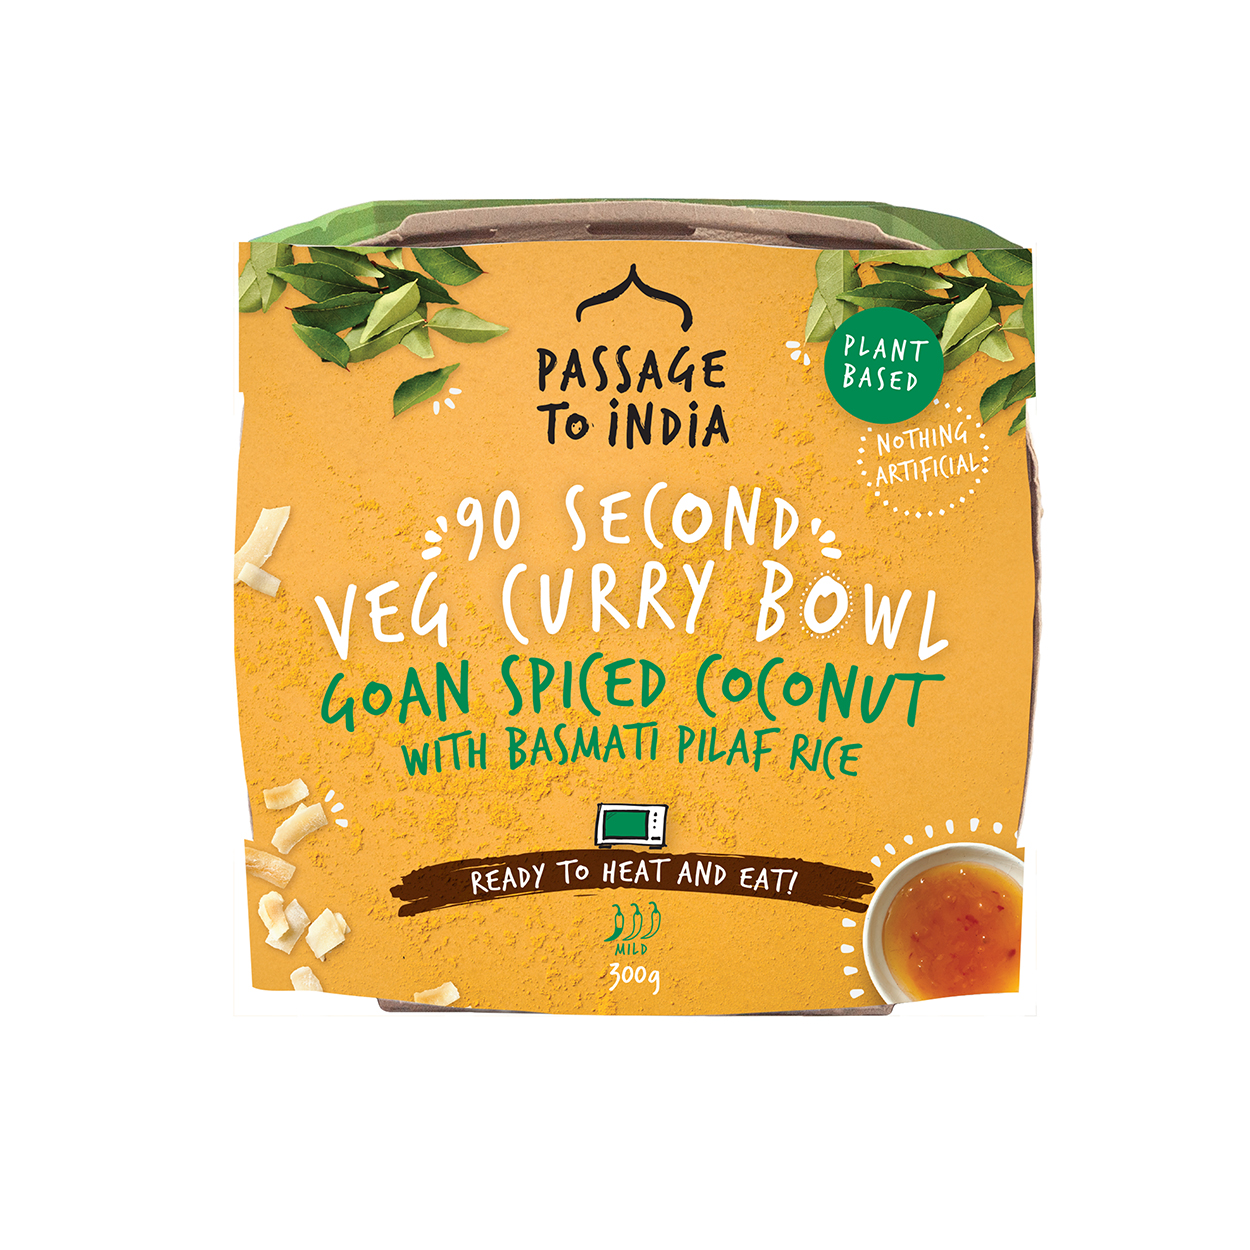 90-Second Veg Curry Bowl in Goan Spiced Coconut Curry Flavour